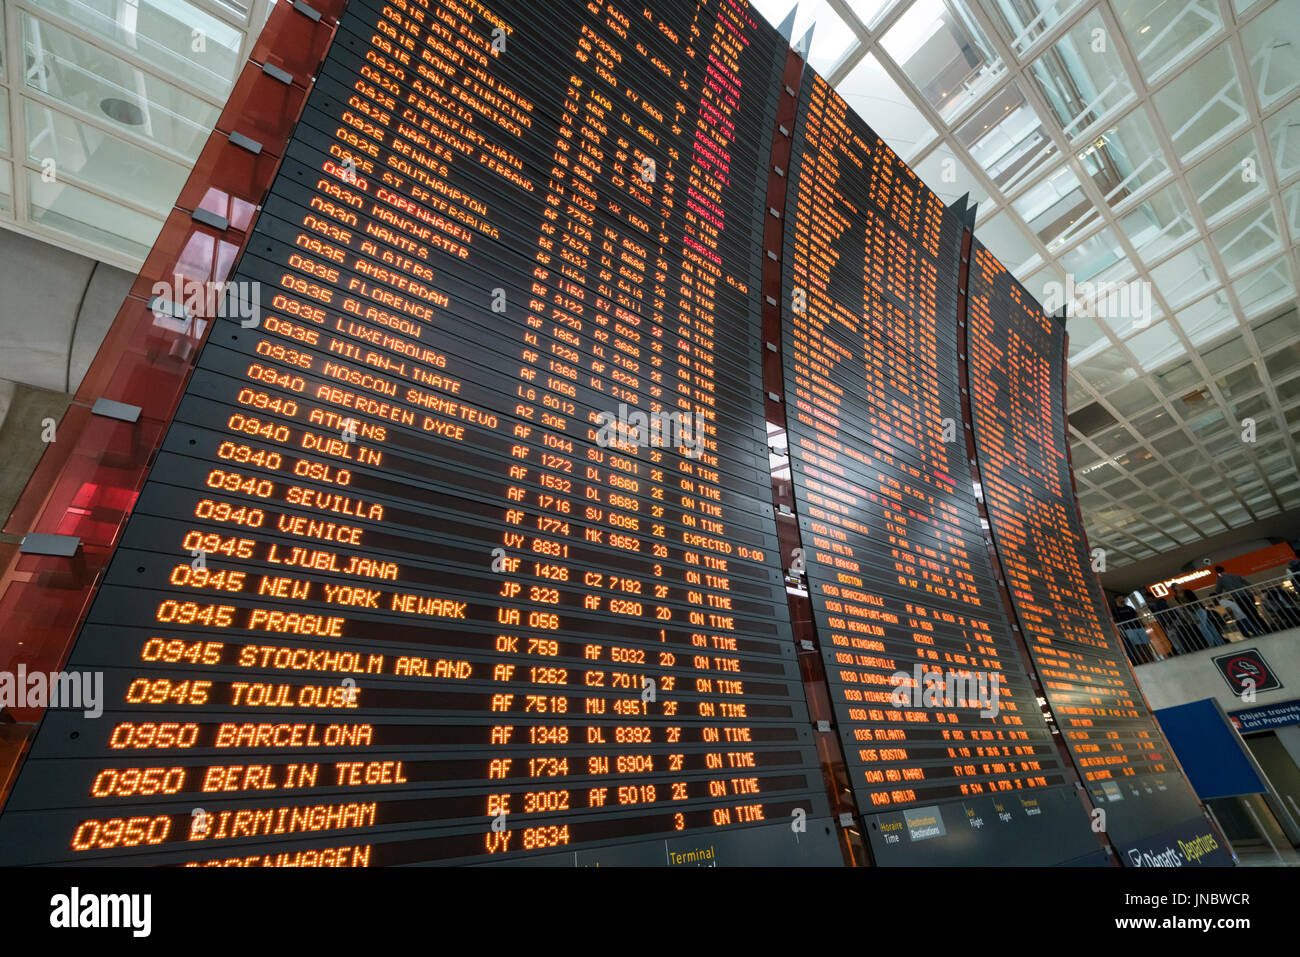 Screens with flight schedules at Charles de Gaulle airport in Paris Stock Photo